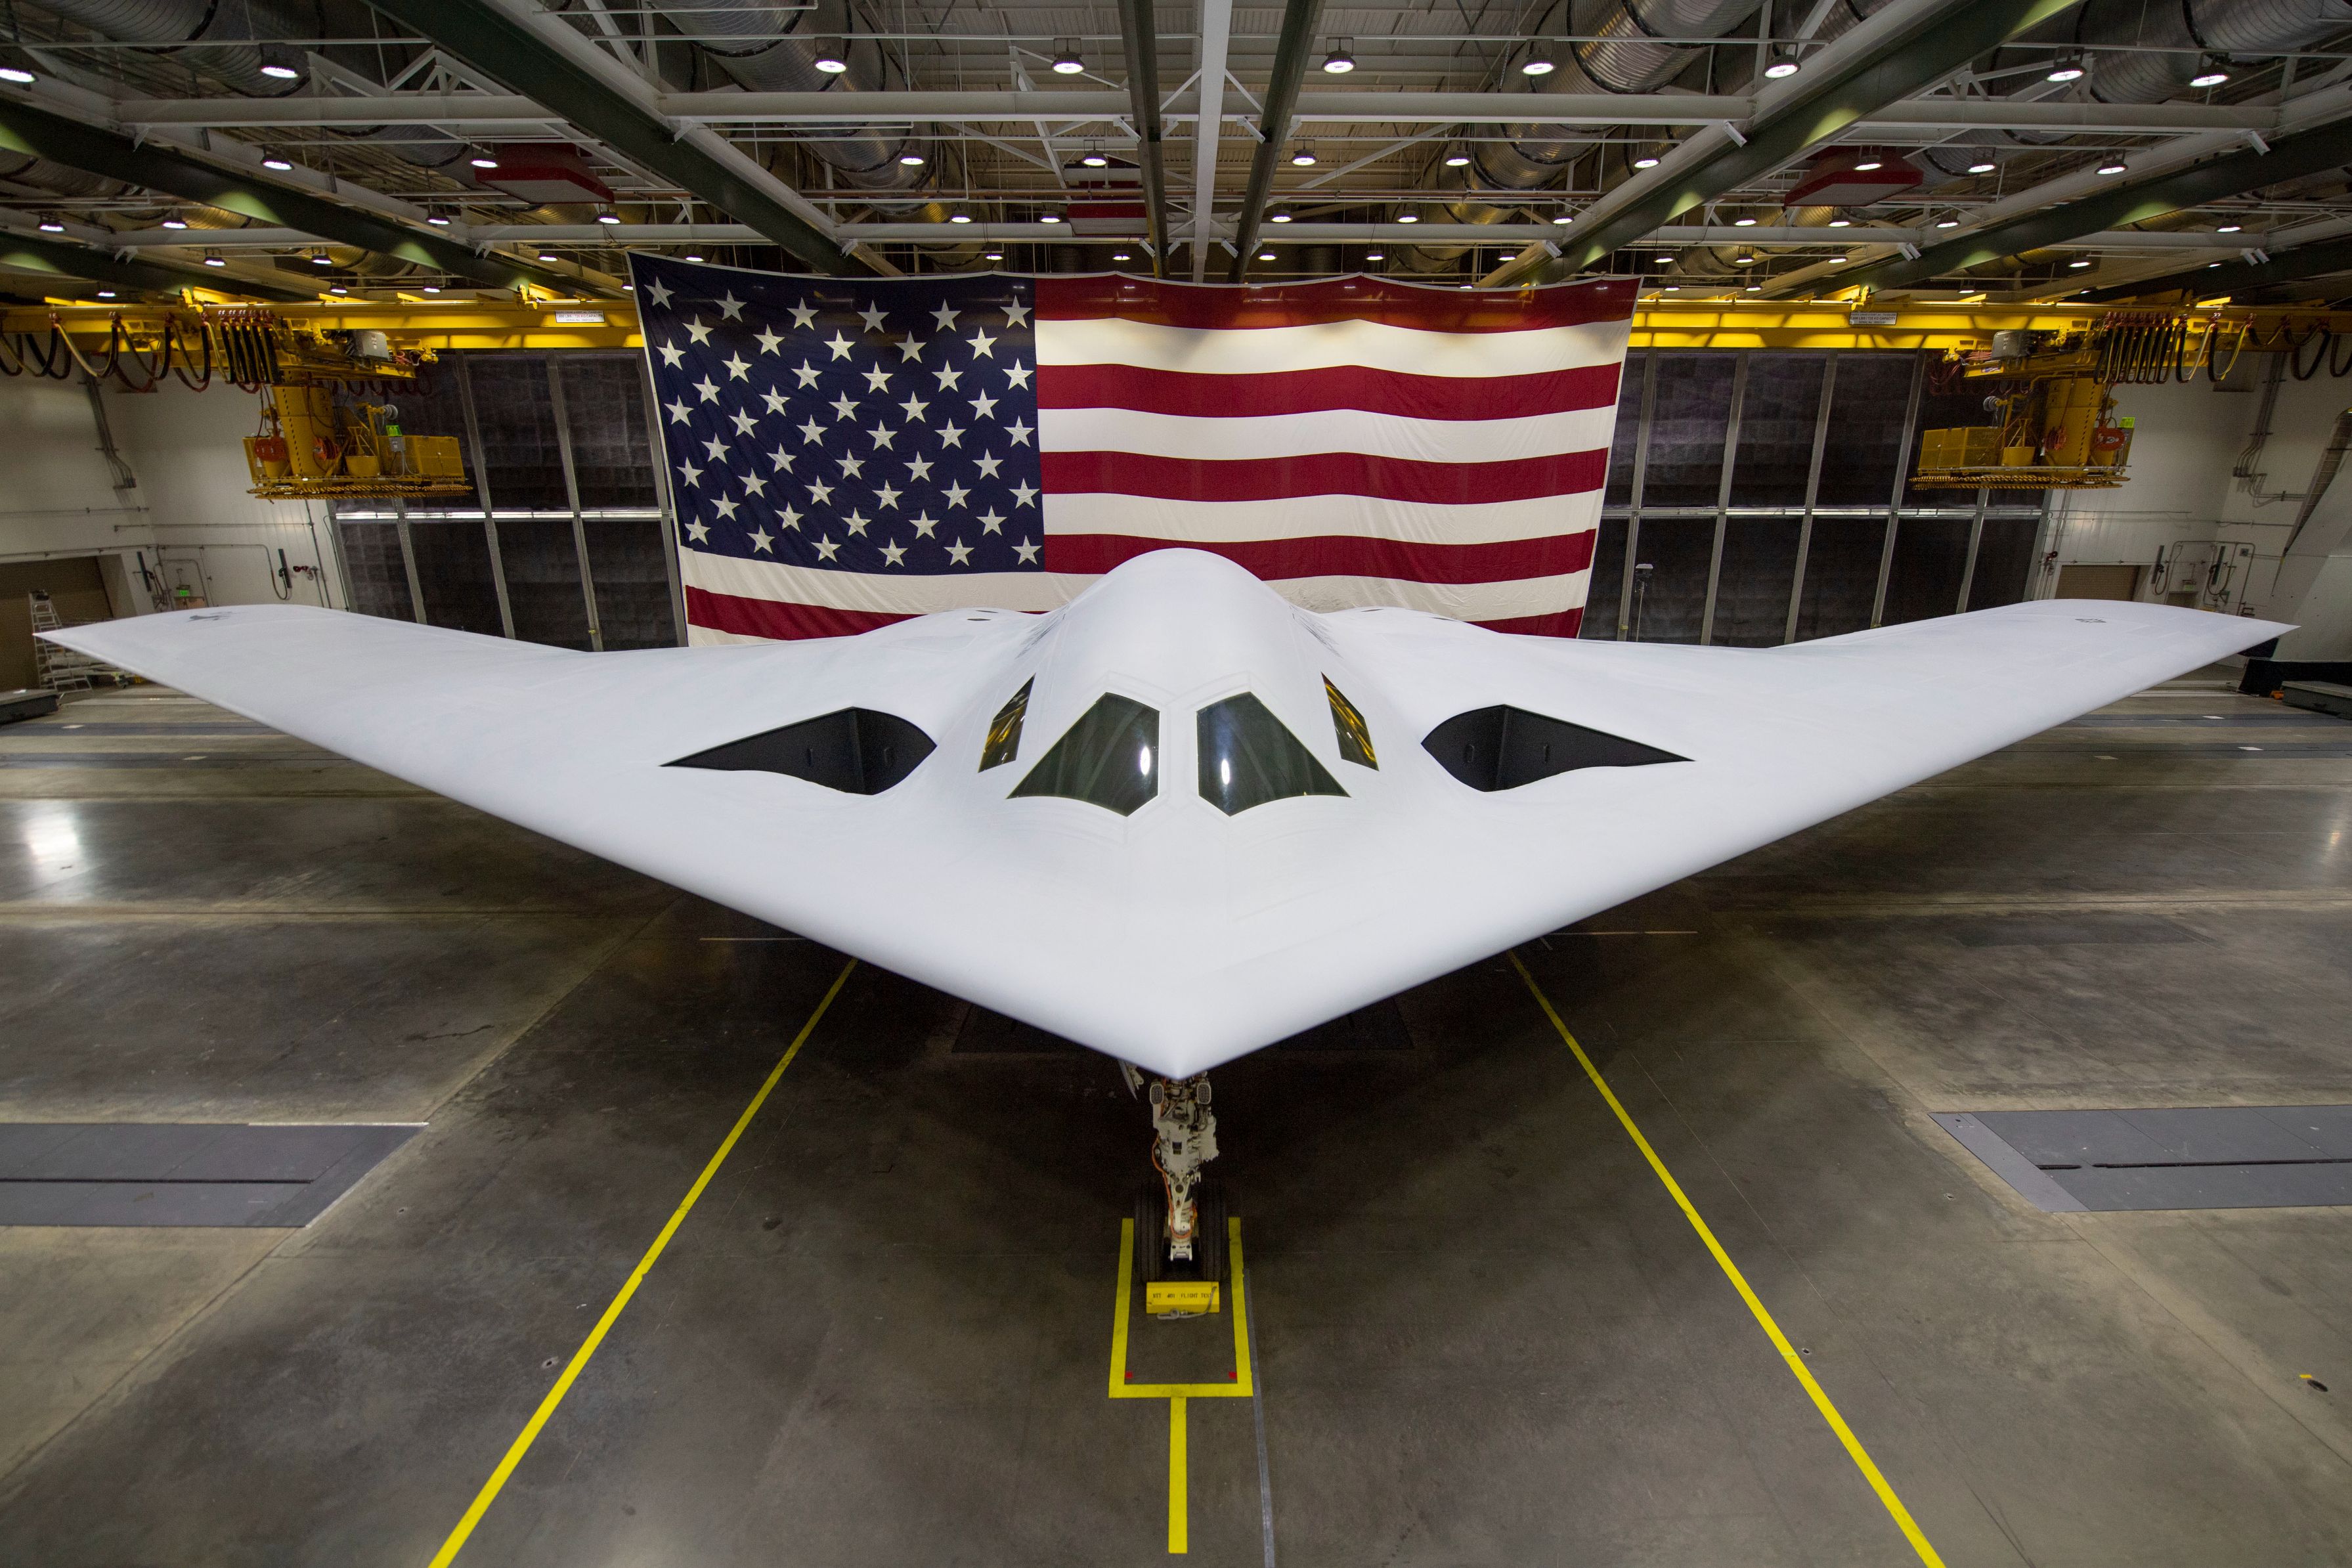 The B-21 Raider was unveiled to the public at a ceremony Dec. 2, 2022 in Palmdale, Calif. The B-21 will provide survivable, long-range, penetrating strike capabilities to deter aggression and strategic attacks against the United States, allies, and partners. (U.S. Air Force photo)